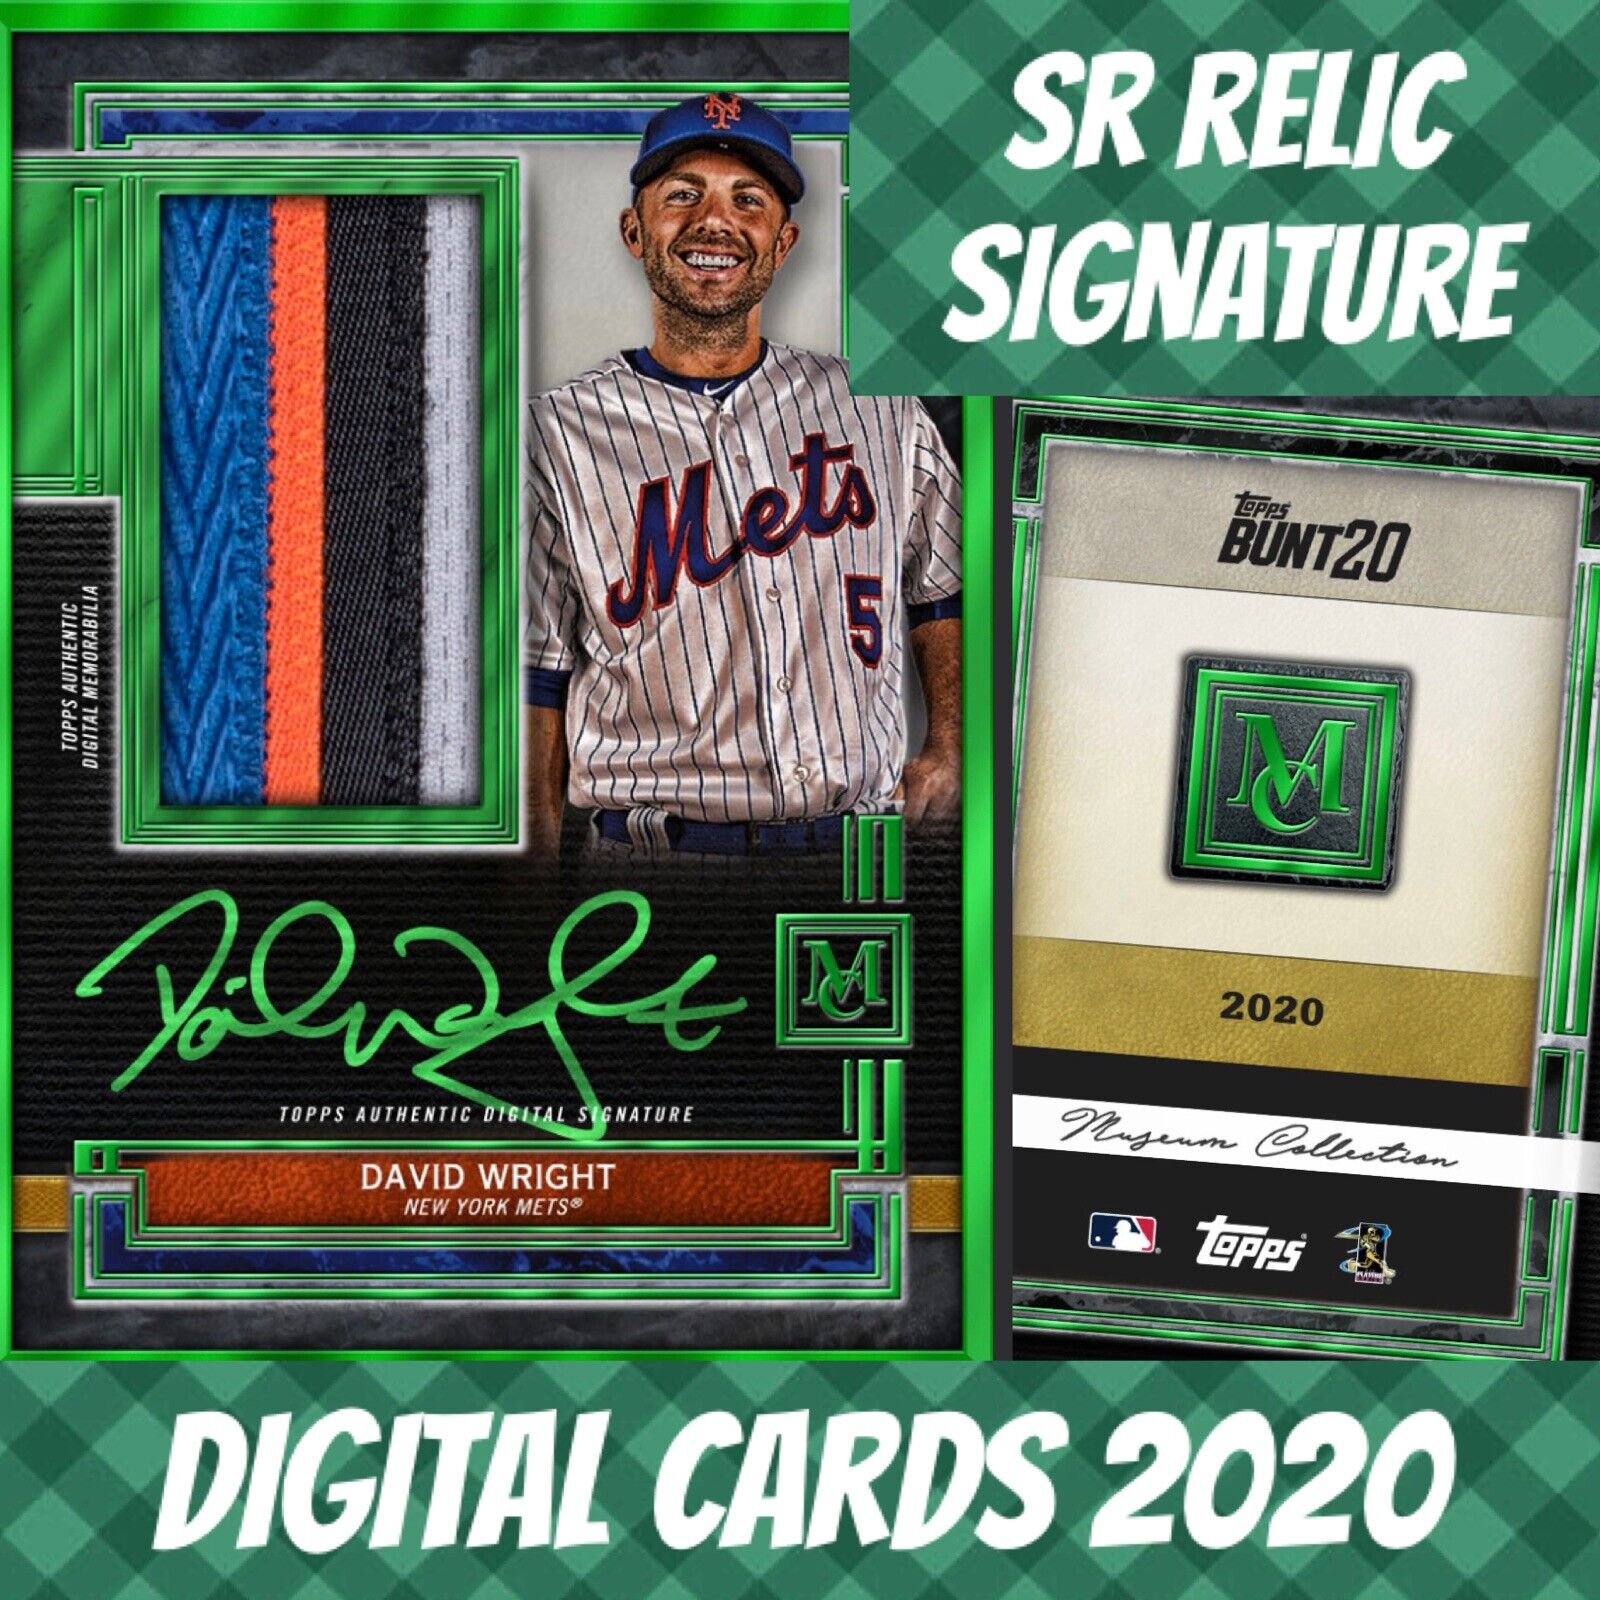 2020 Topps Colorful Digital David Wright Museum S/2 Green Framed Signature Relic